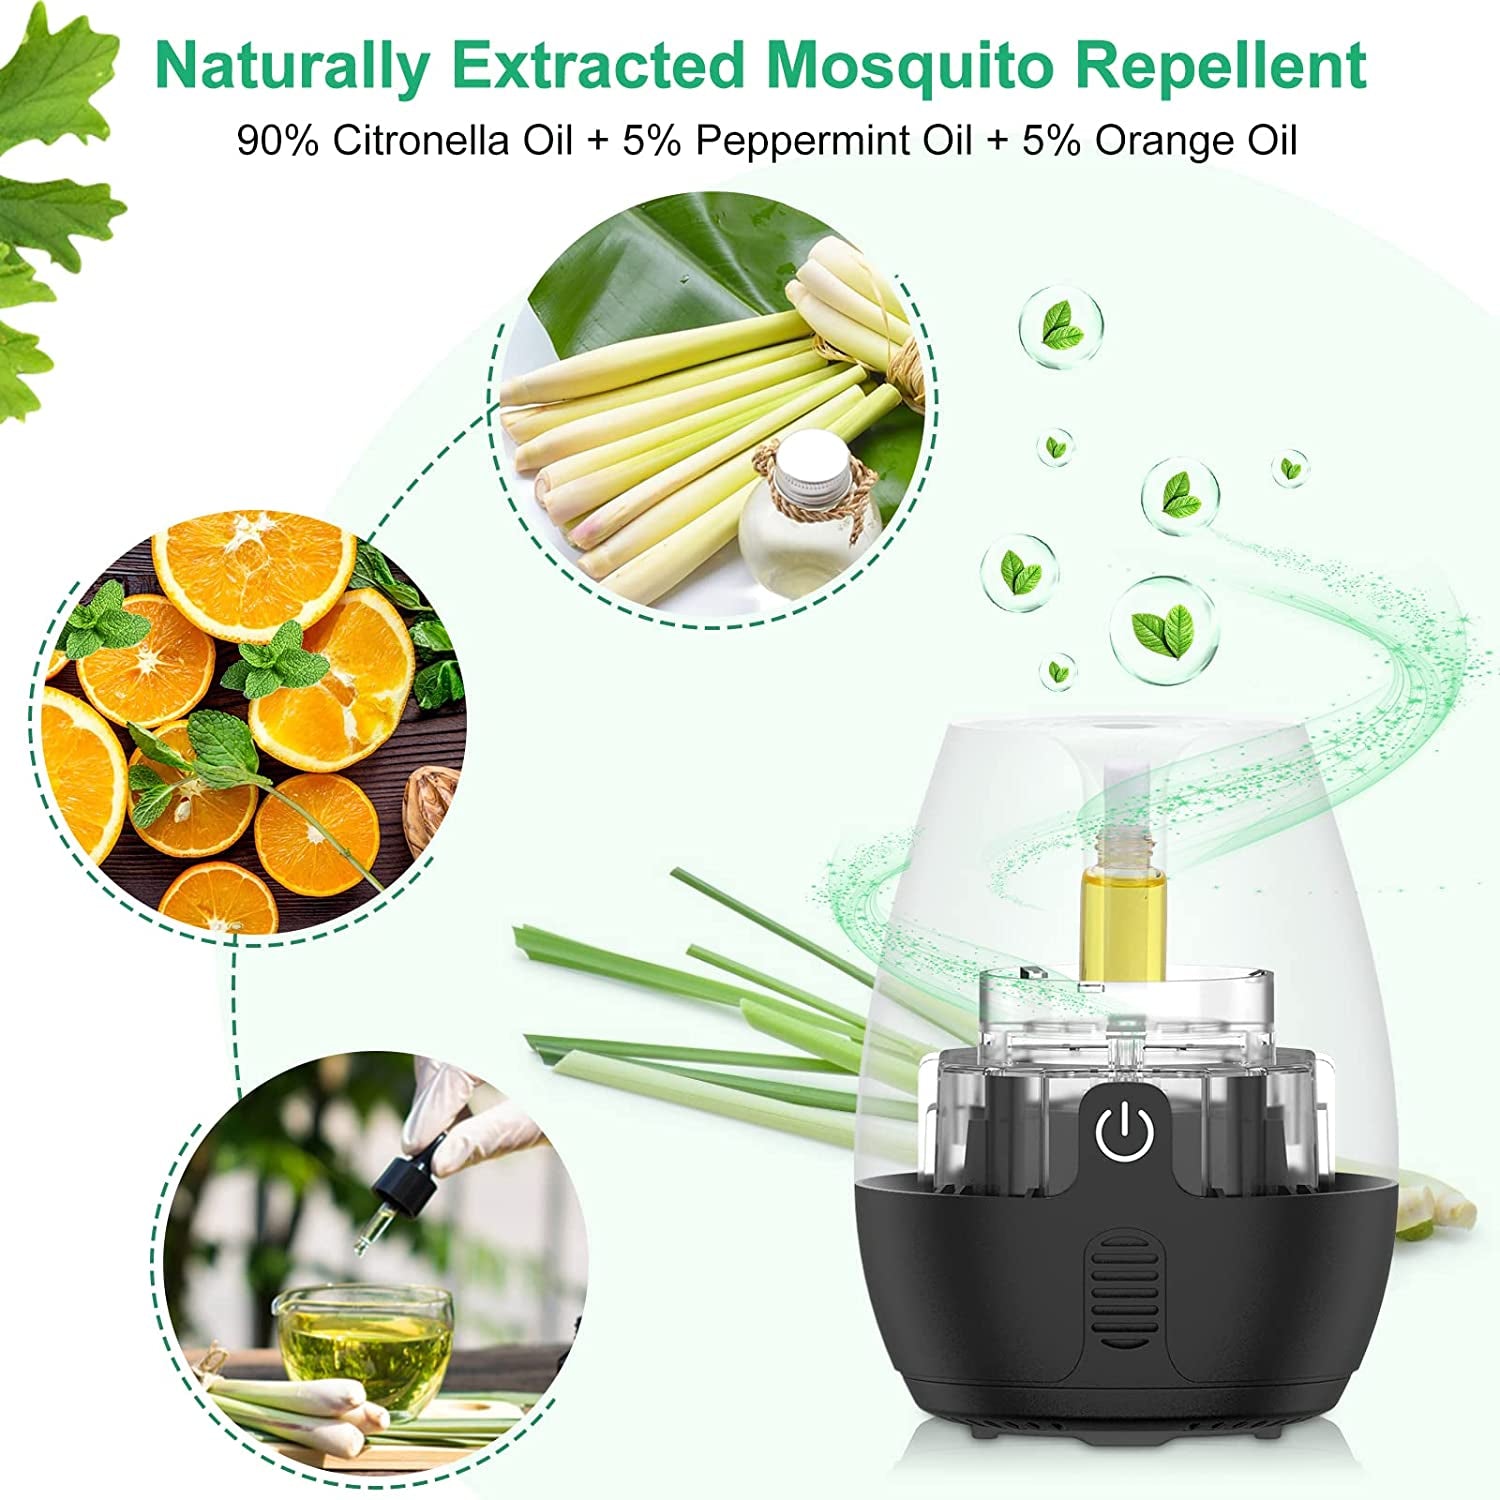 Mosquito Repellent Outdoor, 100% Natural Citronella Oil Mosquito Repeller Indoors [Infant Grade], DEET-Free, Portable Rechargeable Bug Mosquito Control for Patio, Room, Yard, Trip, 2X Refills